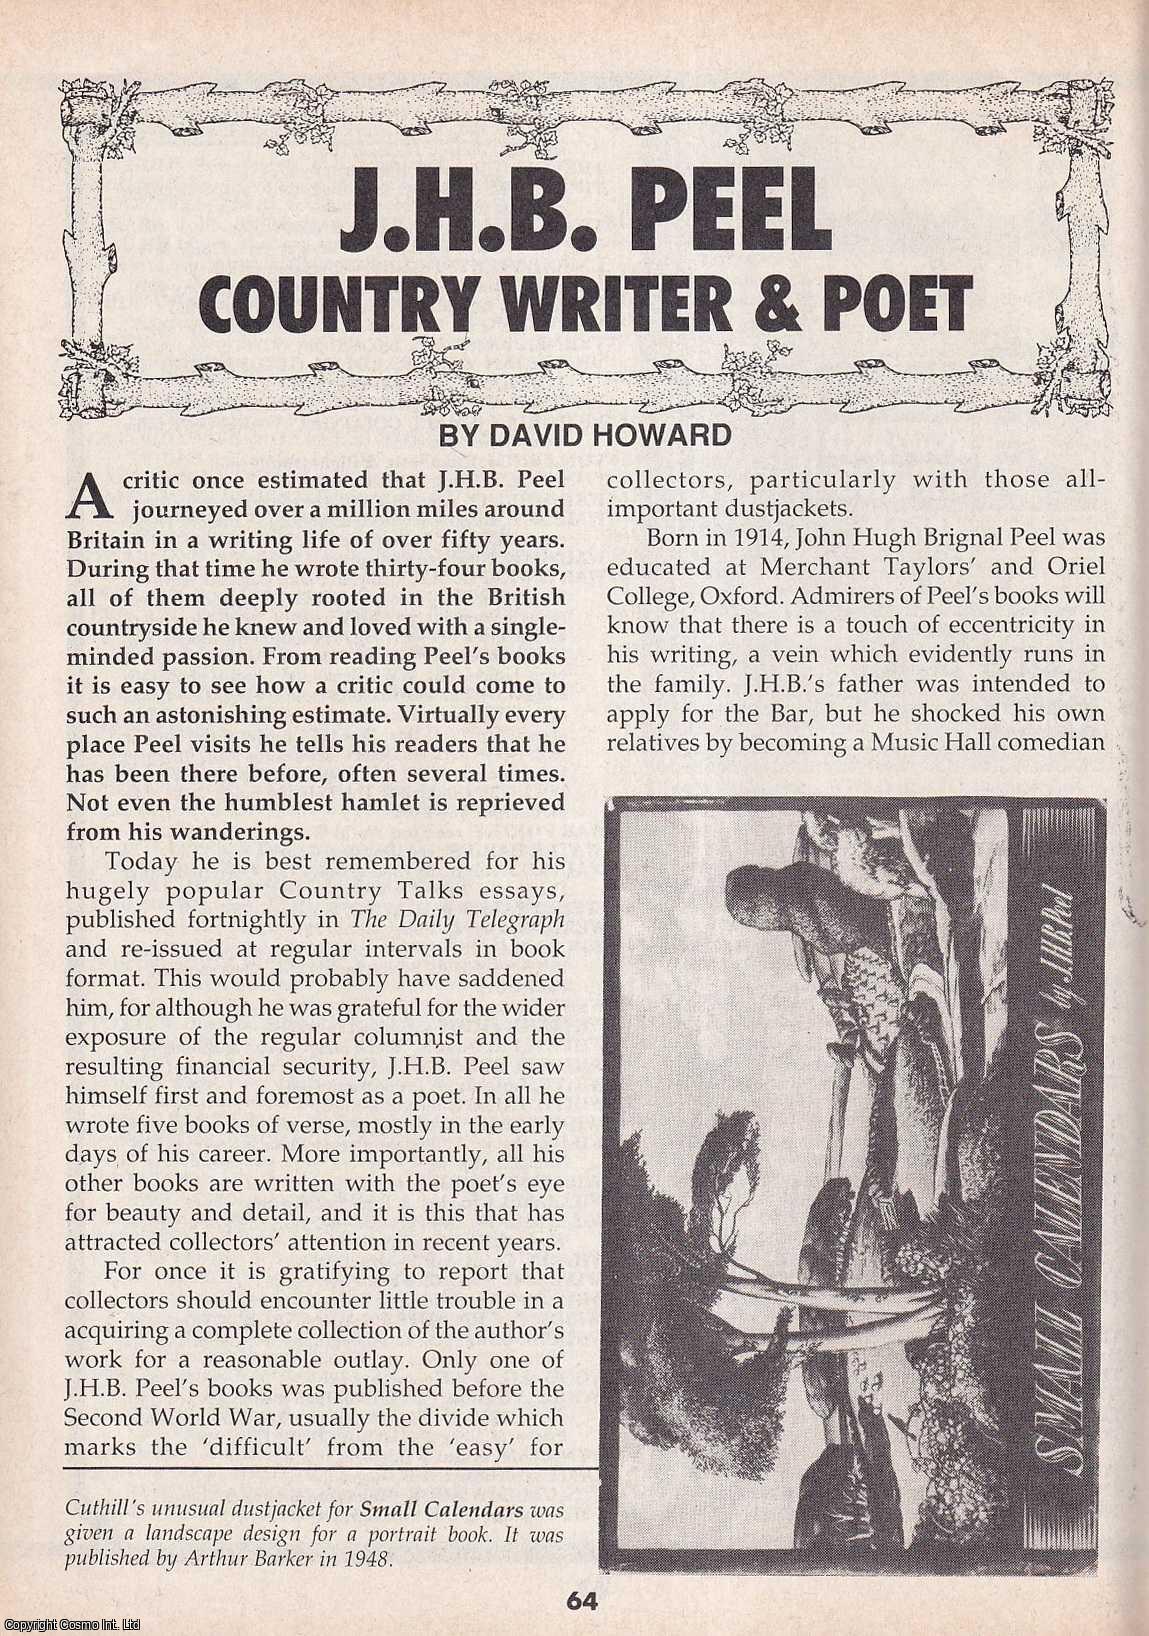 David Howard - J. H. B. Peel. Country Writer and Poet. This is an original article separated from an issue of The Book & Magazine Collector publication, 1991.